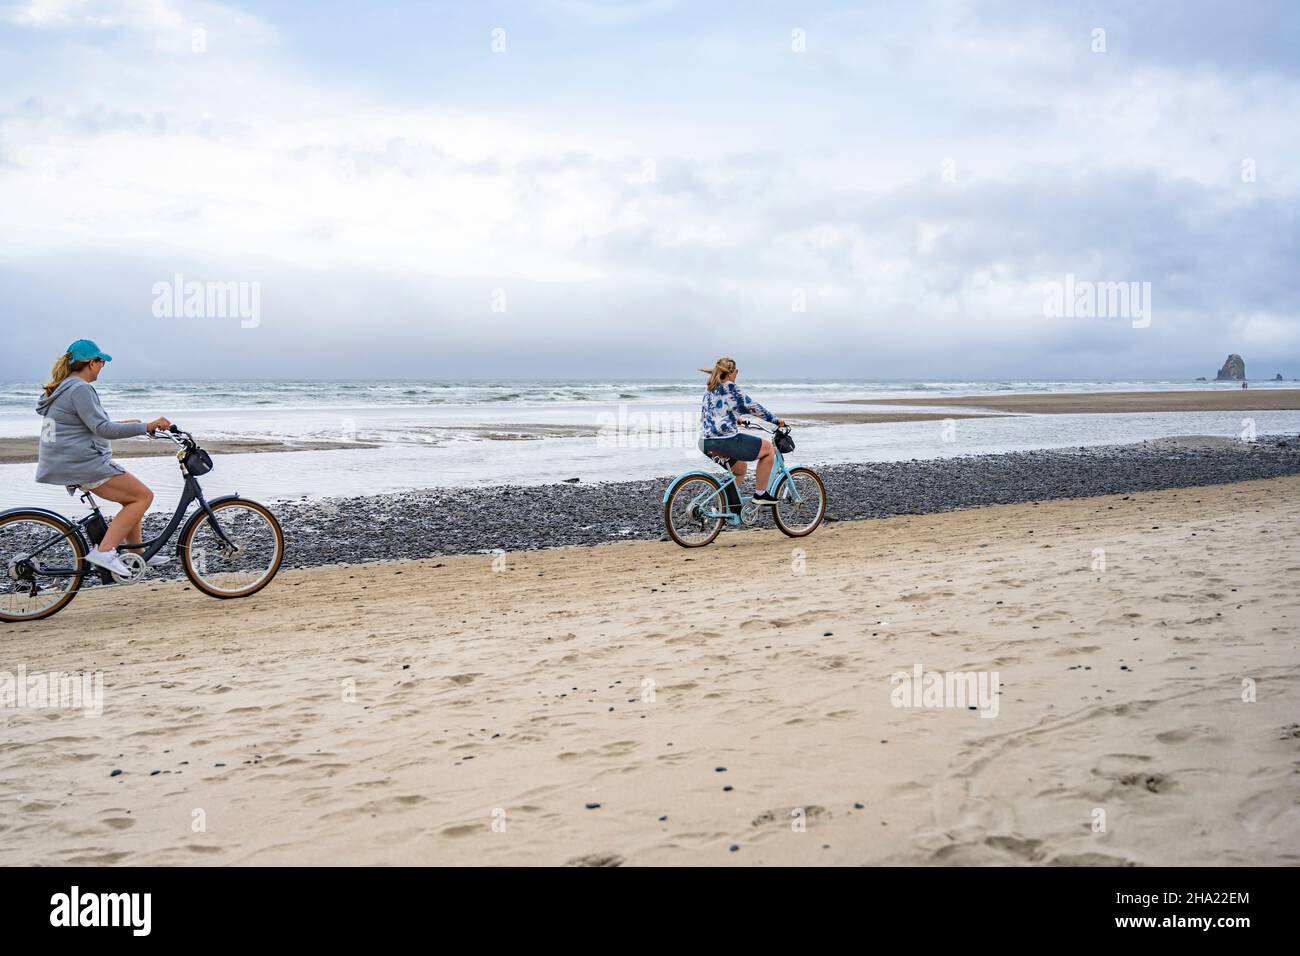 Two middle-aged women amateur cyclists rides bicycles traveling on the cost line along the Northwest Pacific Ocean preferring an active healthy lifest Stock Photo